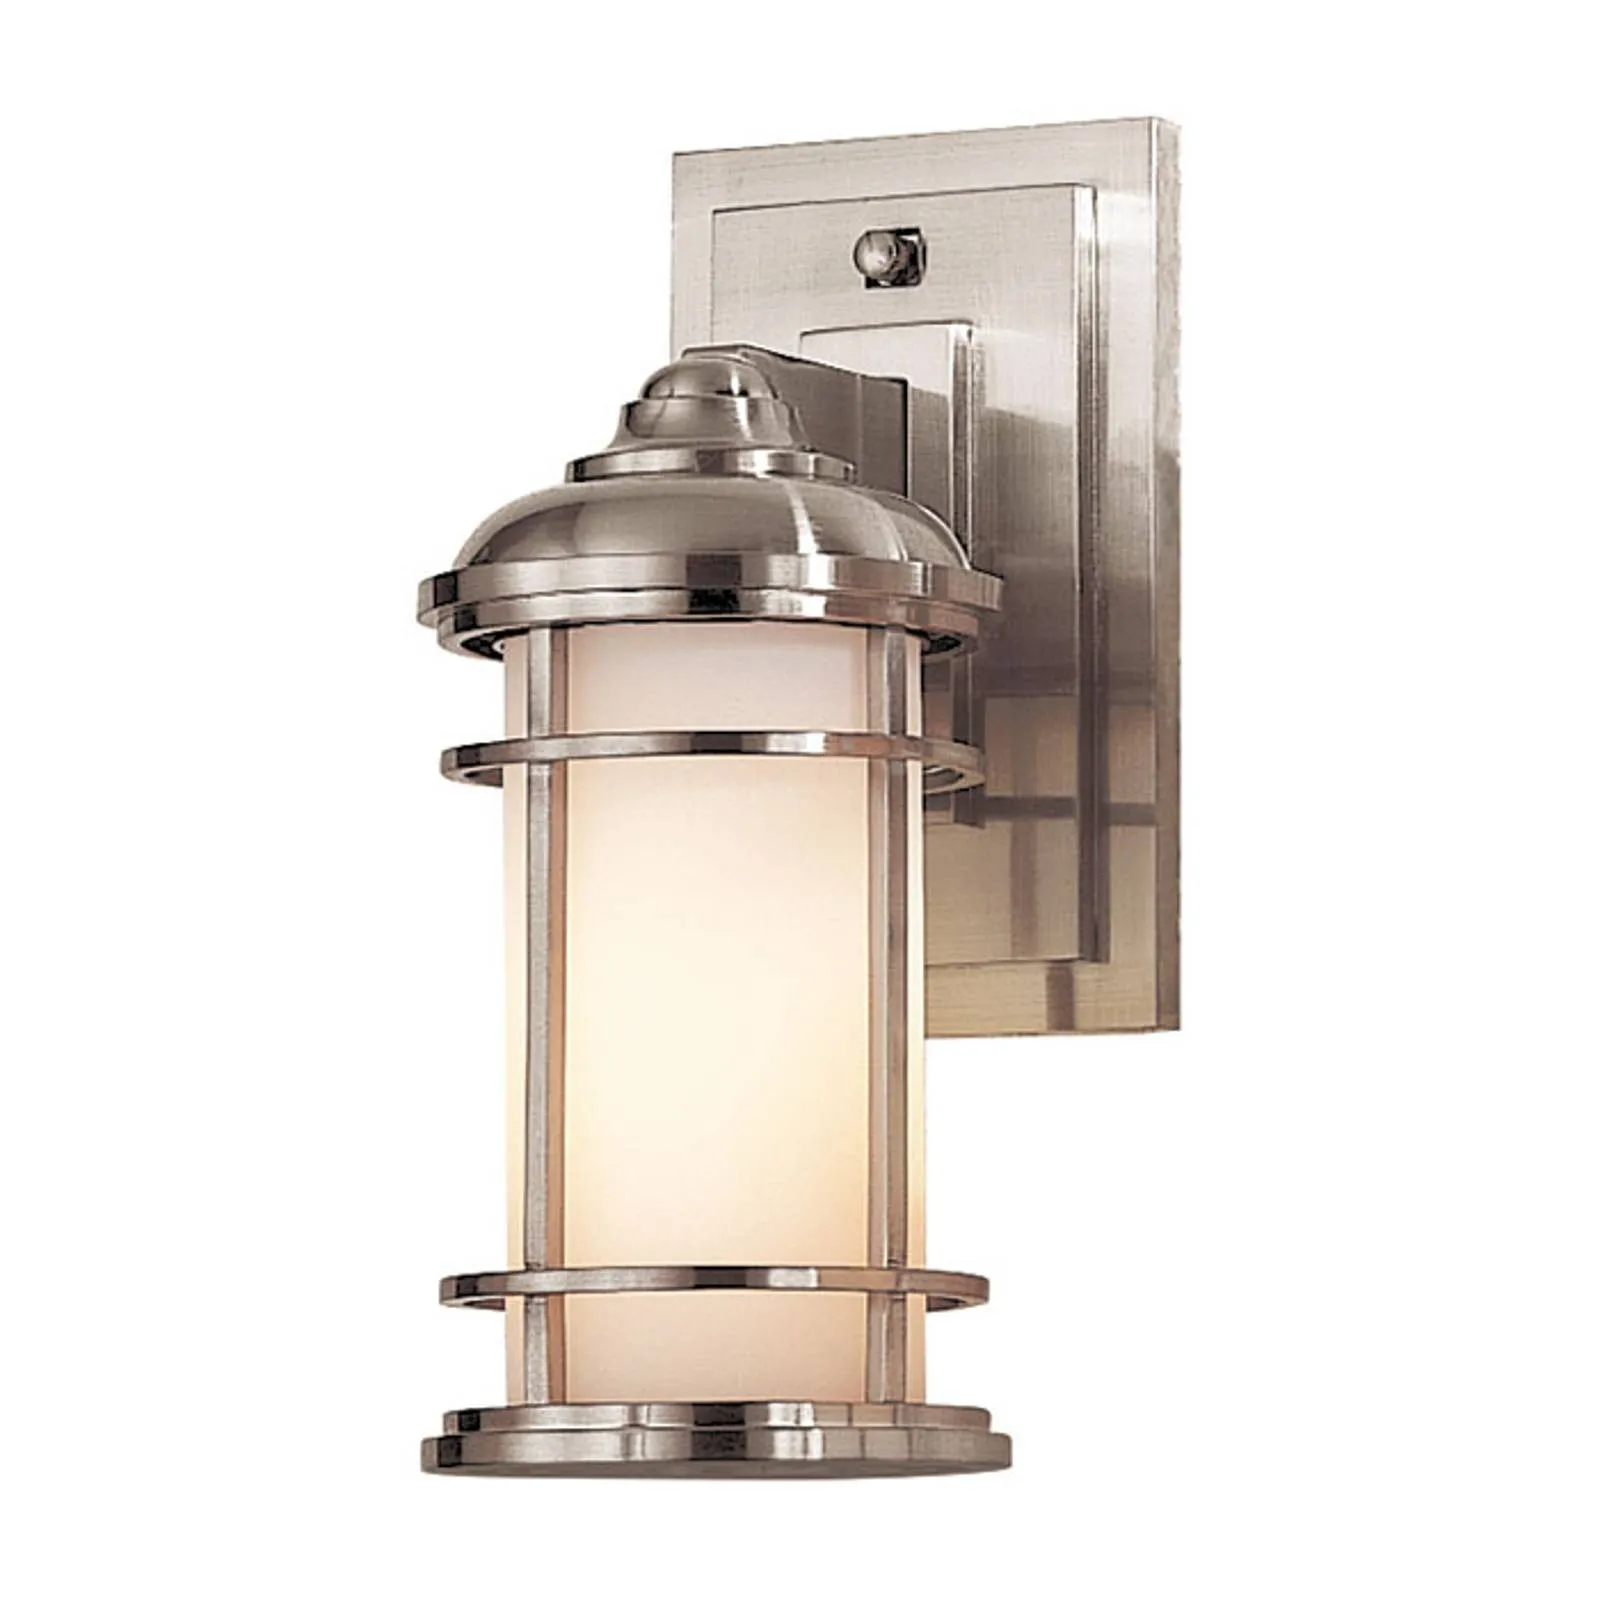 Lighthouse outdoor wall lamp, brushed steel